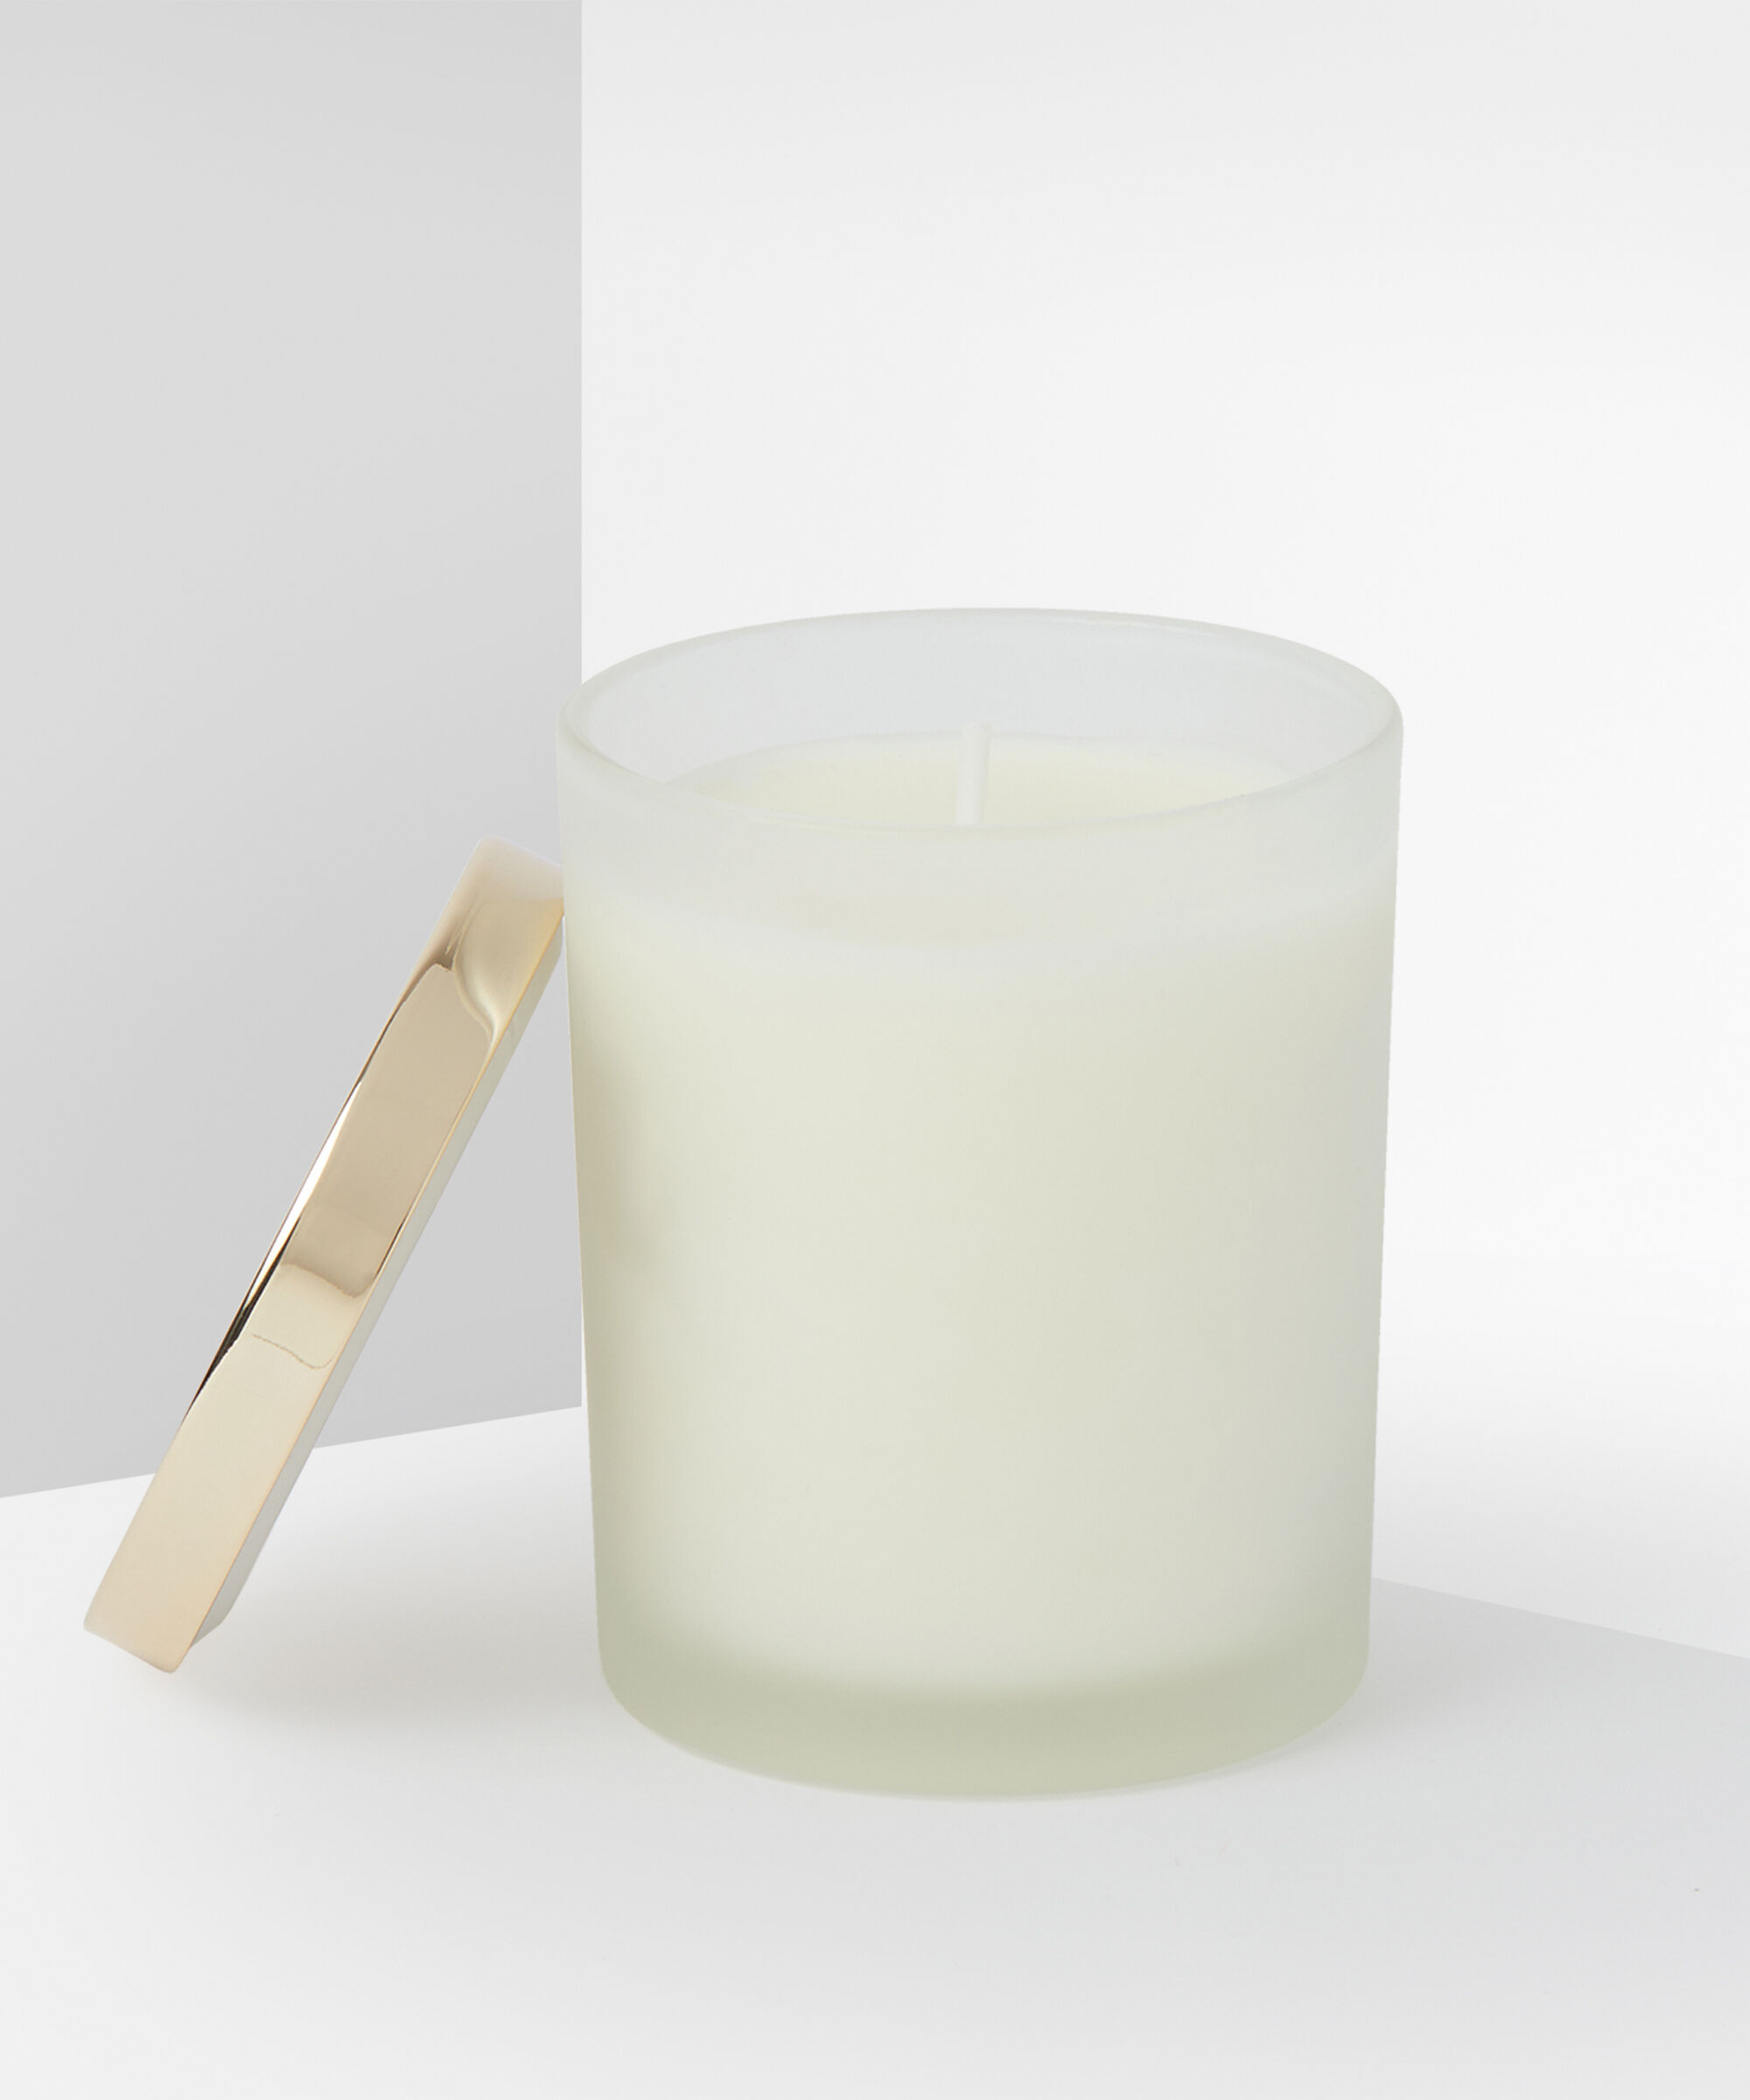 My VIV Lavender & Amber Scented Candle